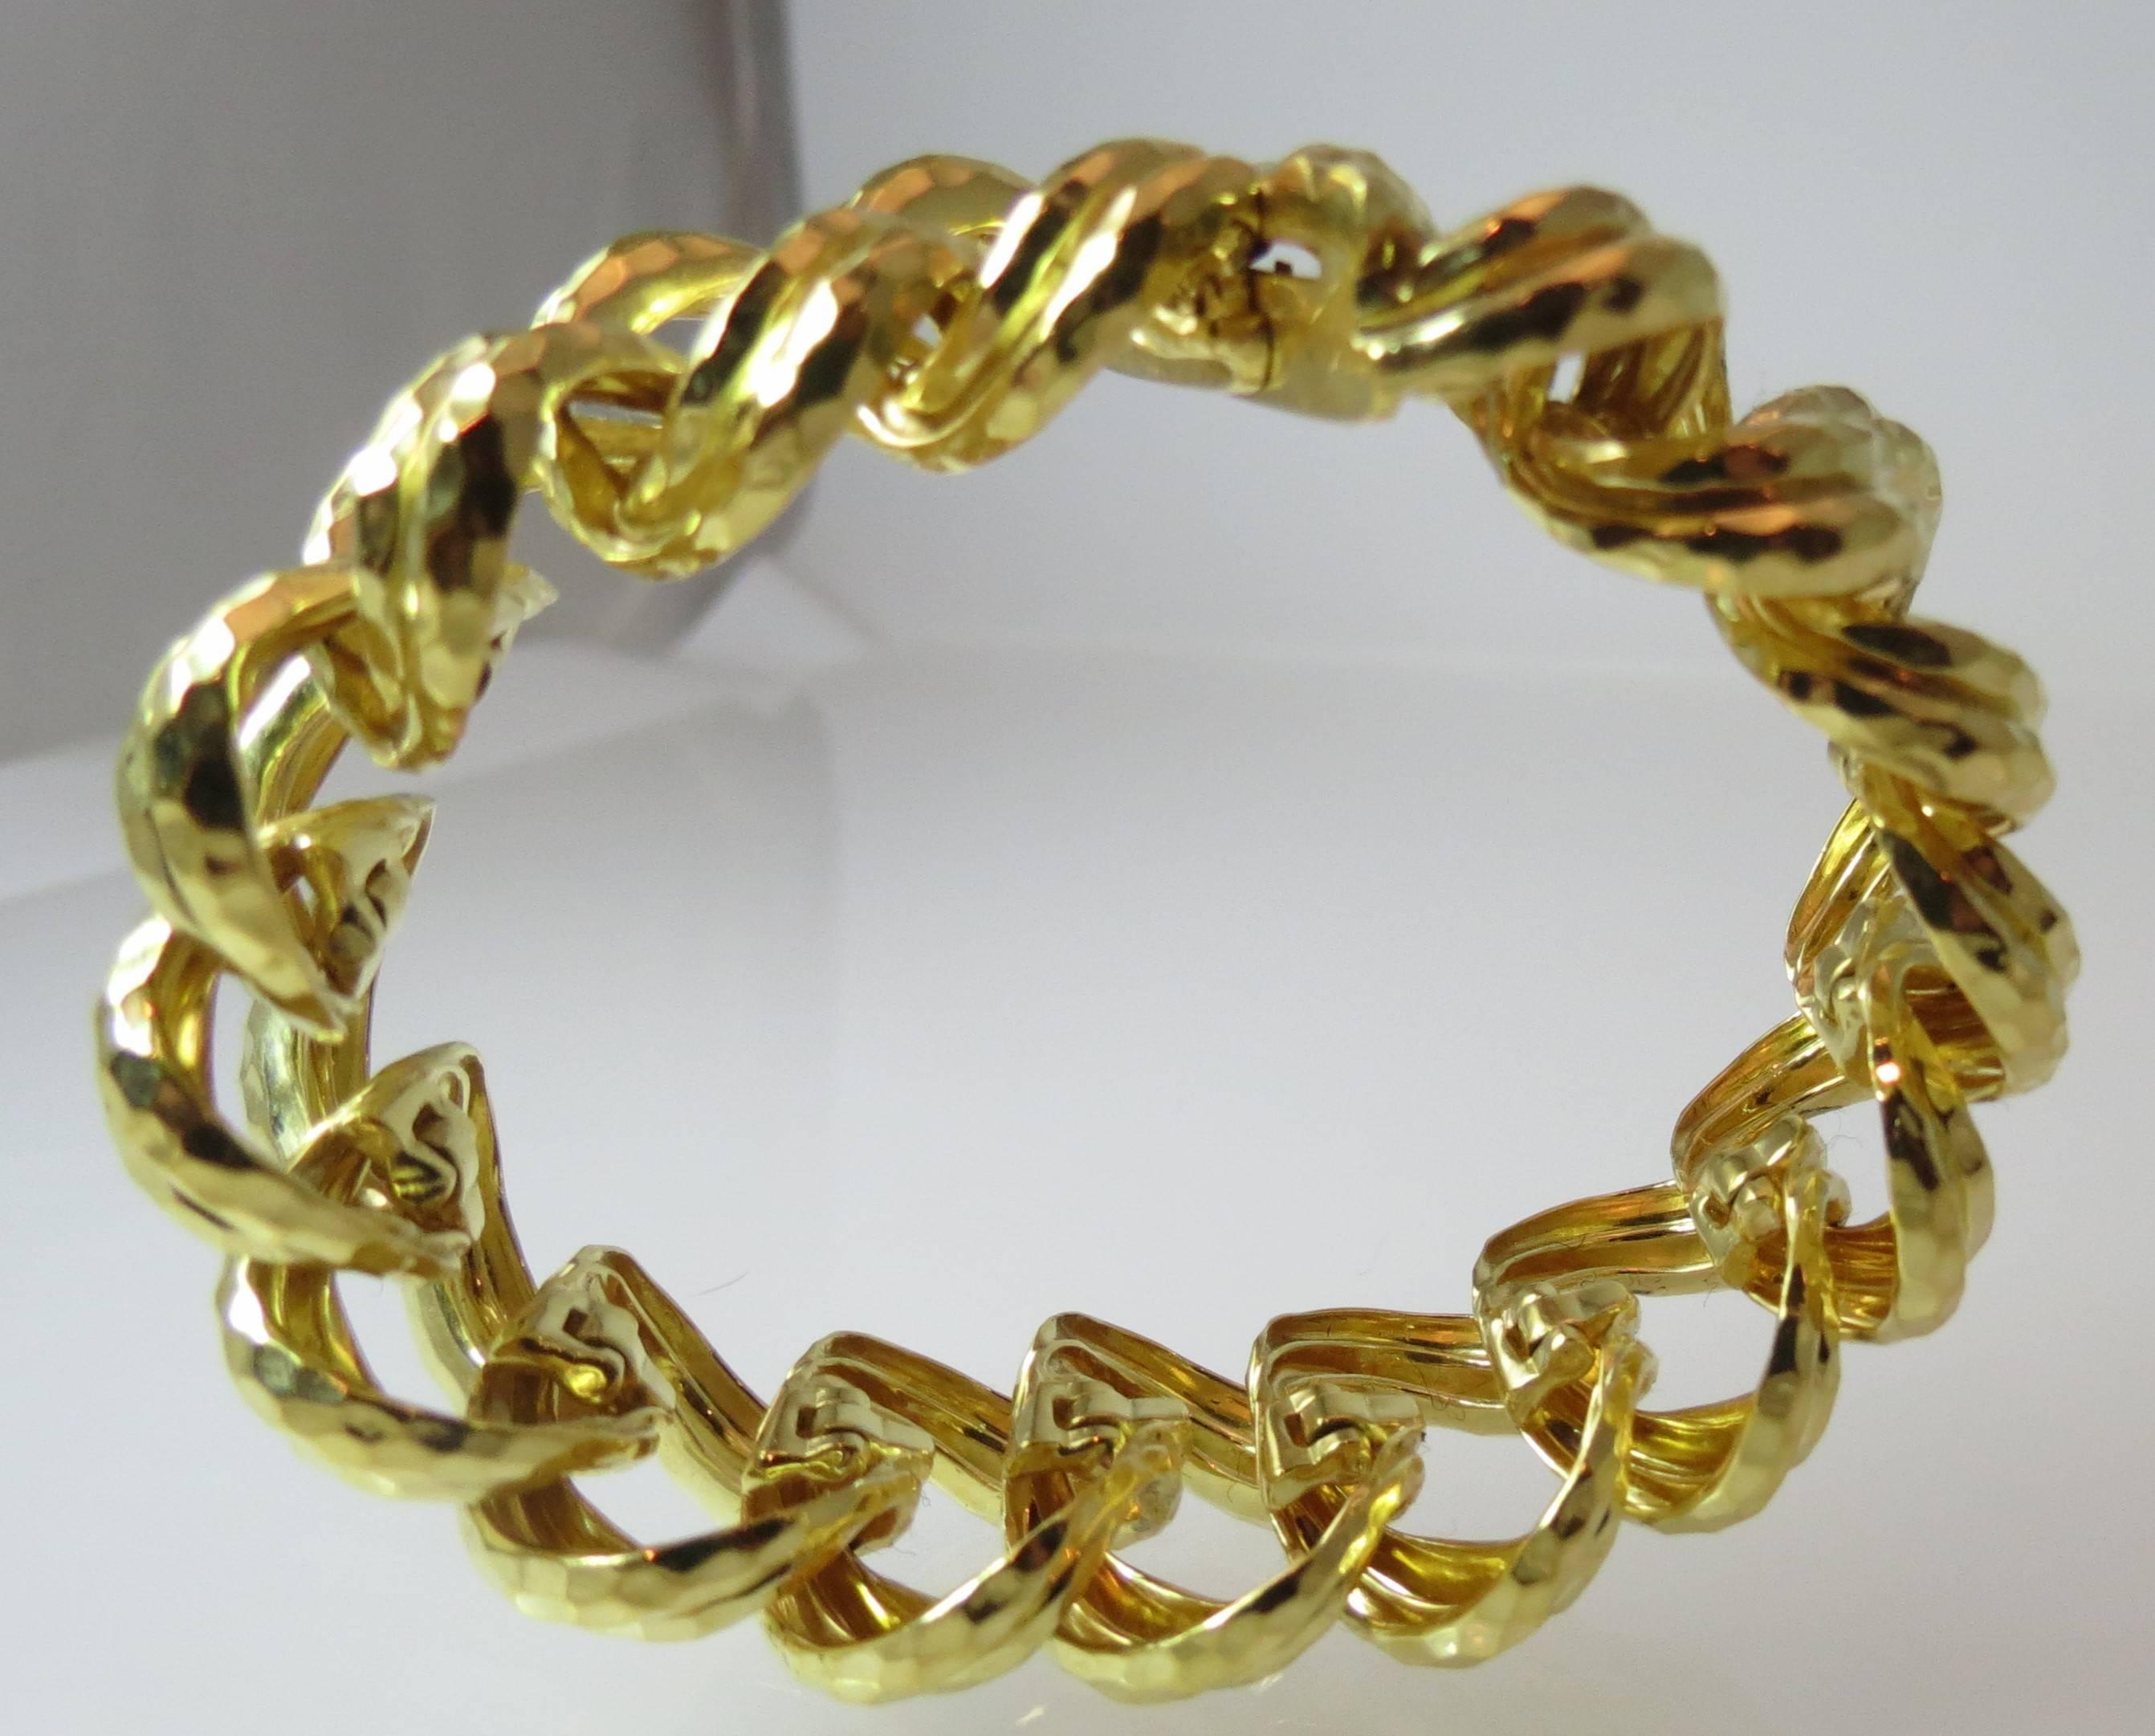 18K yellow gold wide faceted link bracelet by Henry Dunay

Length of bracelet 7 inches
Width of bracelet 7/8 of an inch
Weighs 107 grams